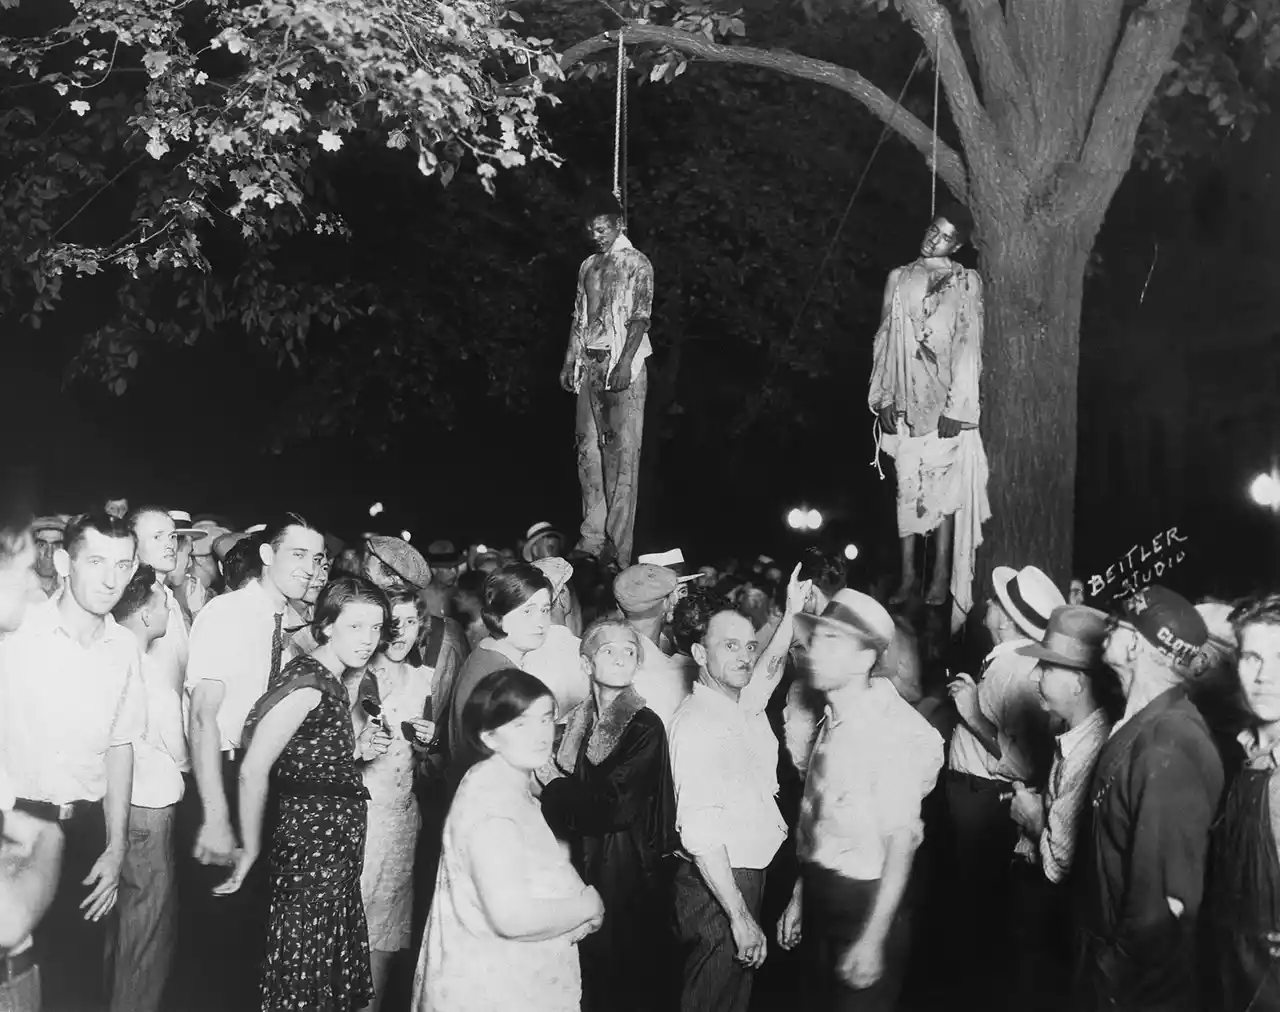 The sadism of white men: Why America must atone for its lynchings